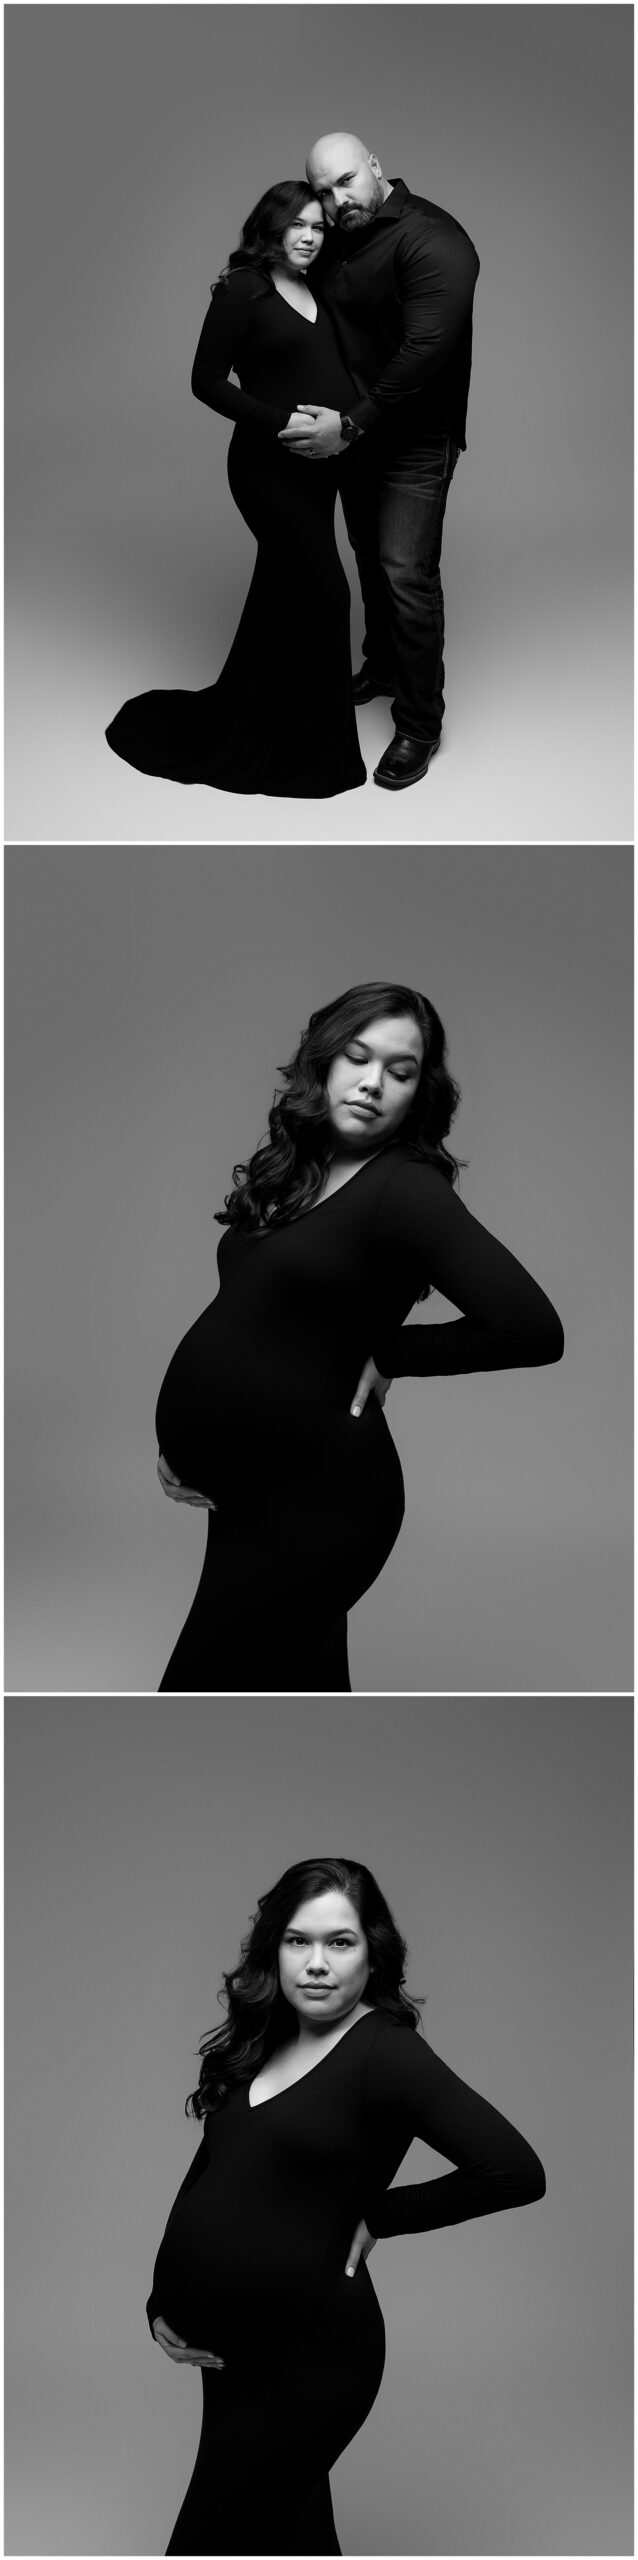 Unique black and white maternity photo montage featuring a man and a woman